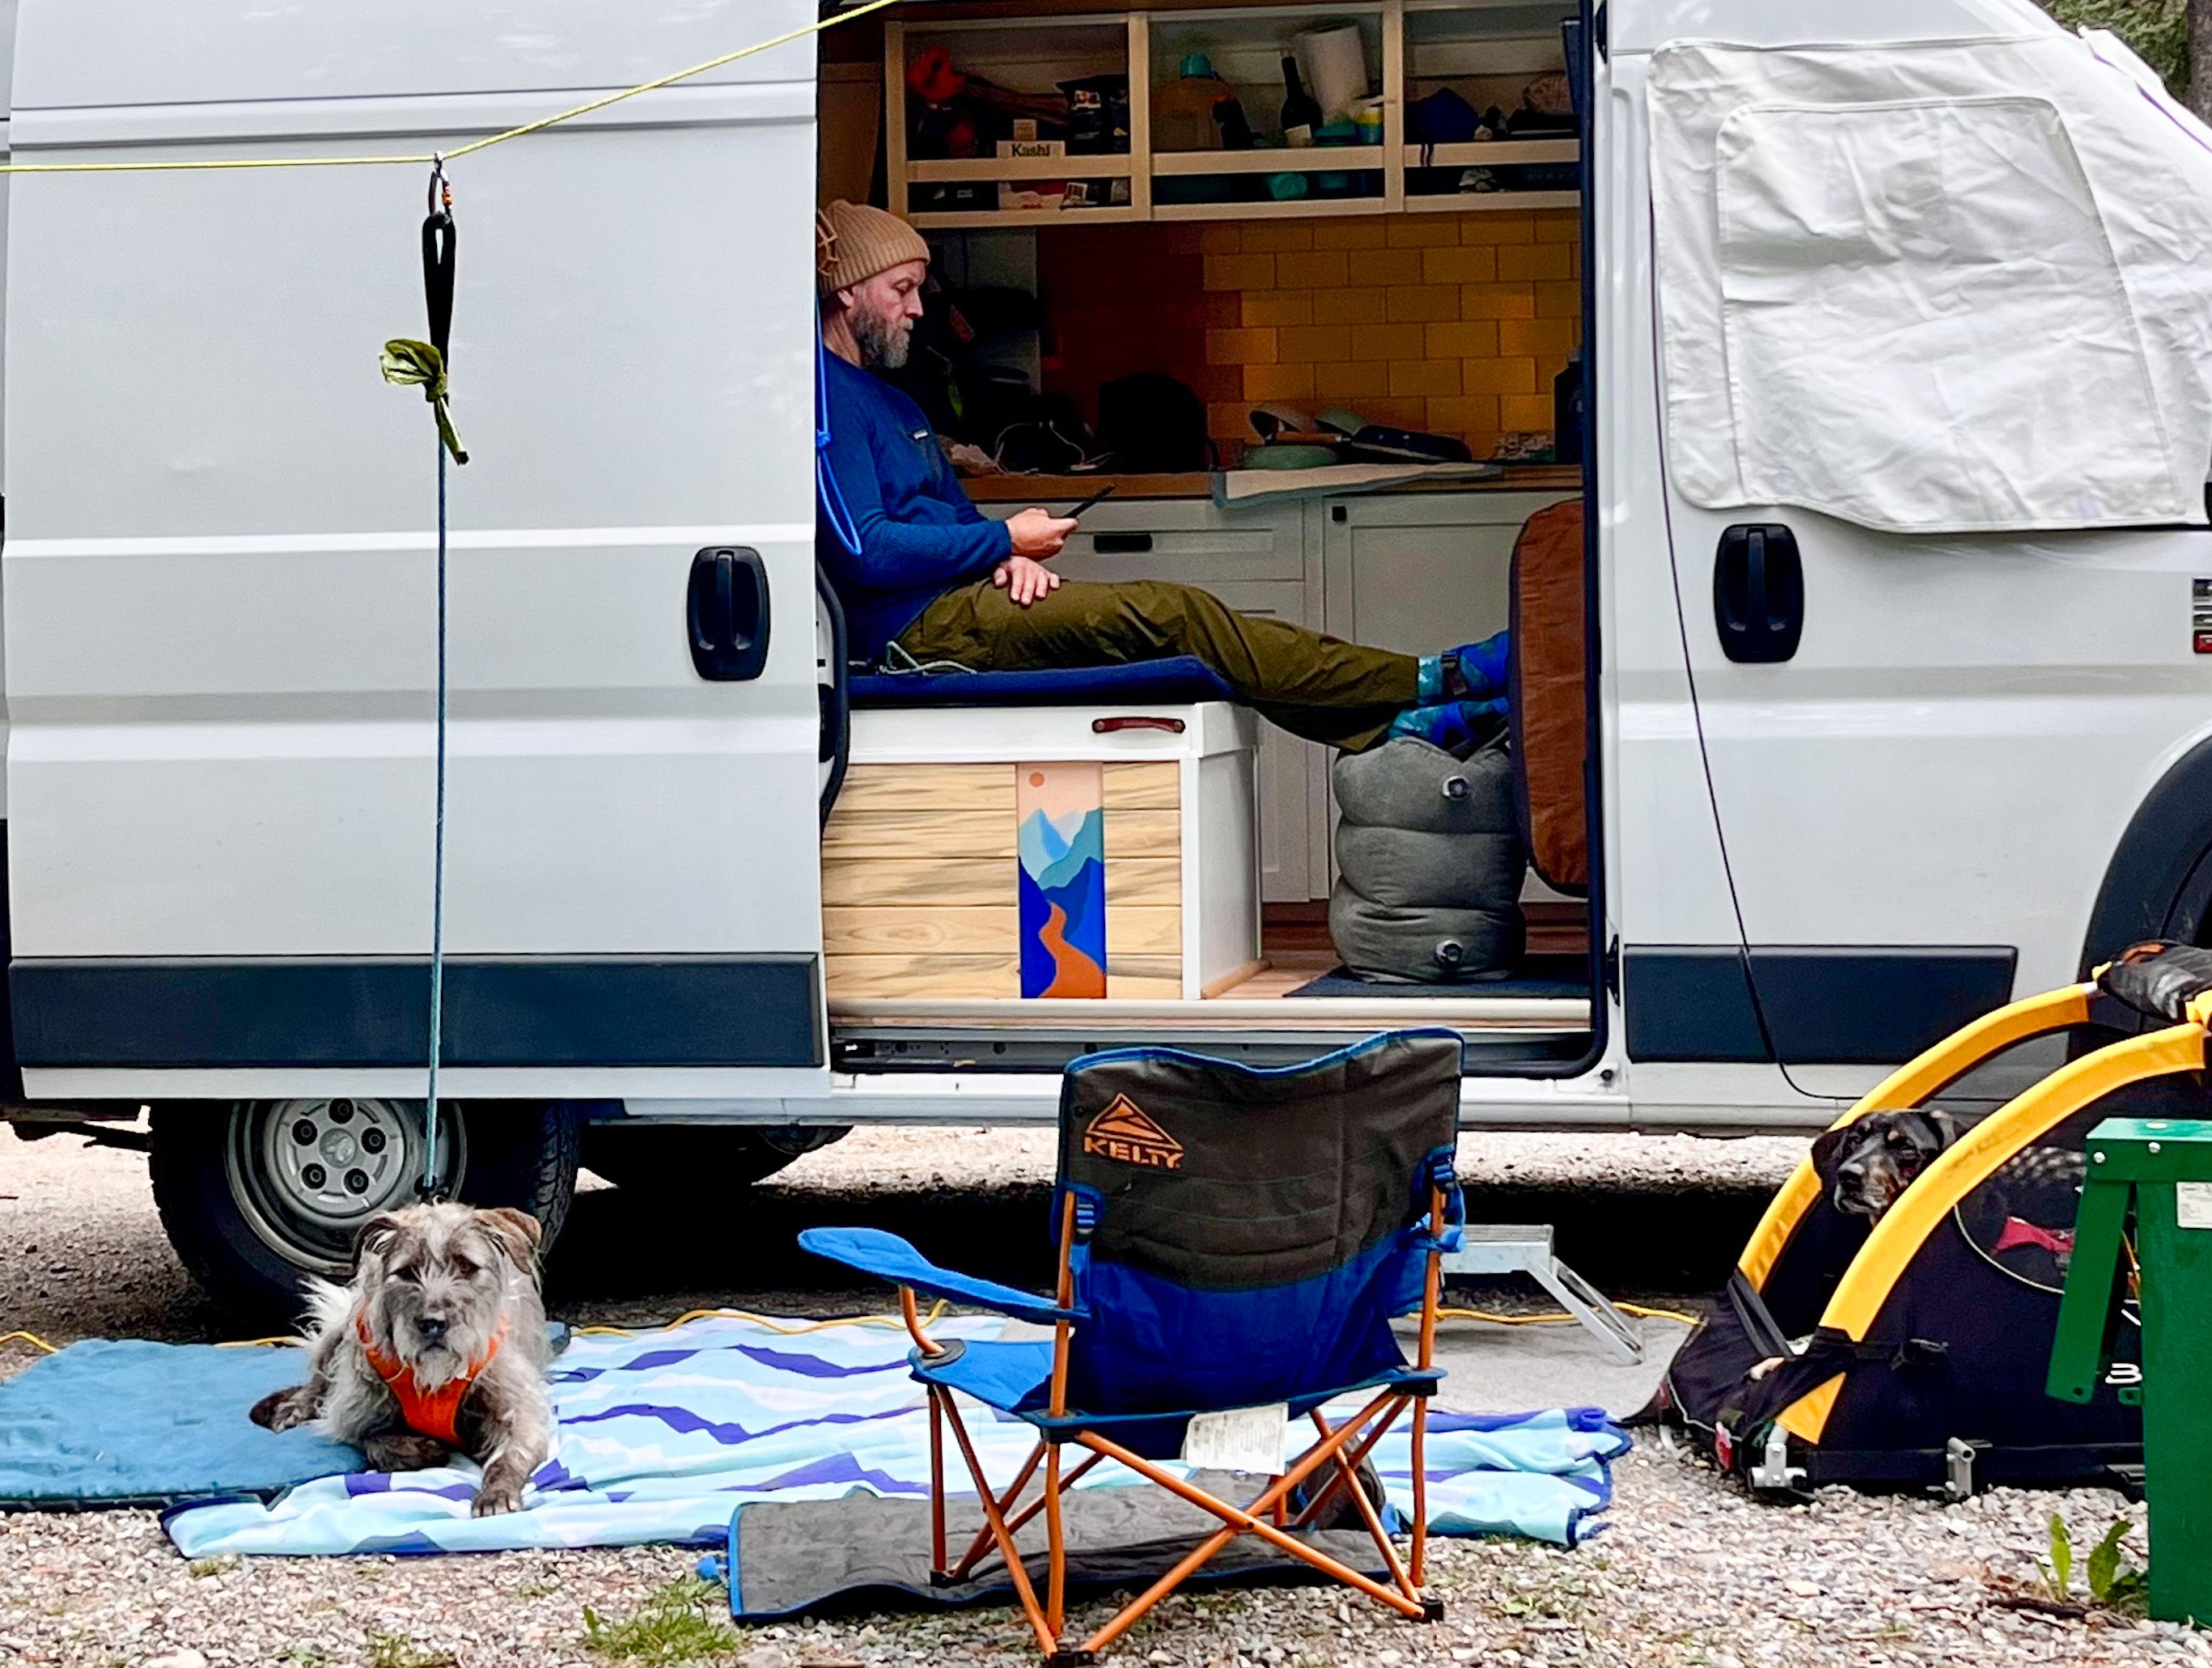 A man and two dogs rest in a camper van.